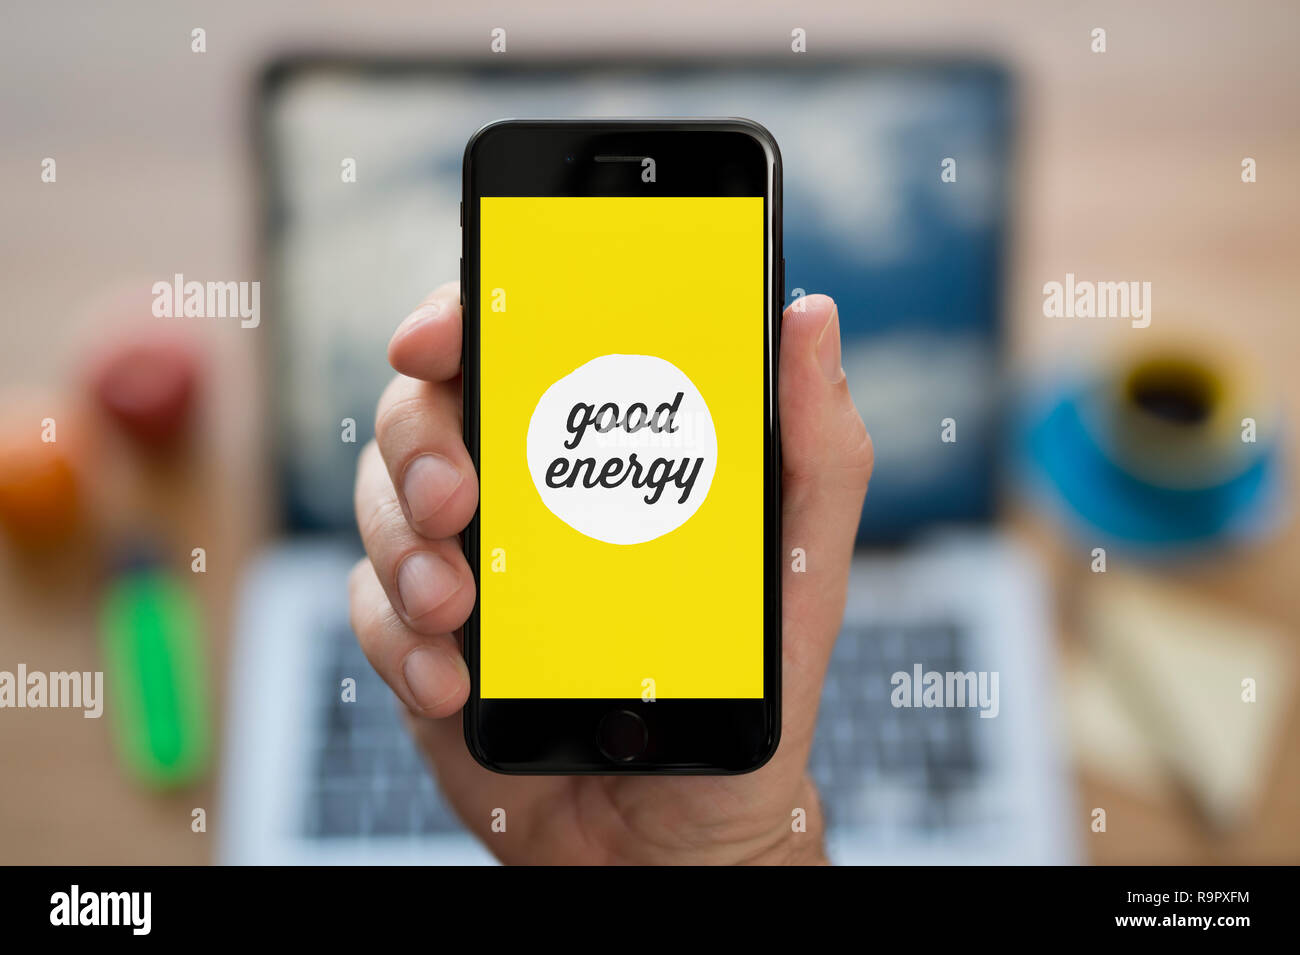 A man looks at his iPhone which displays the Good Energy logo (Editorial use only). Stock Photo